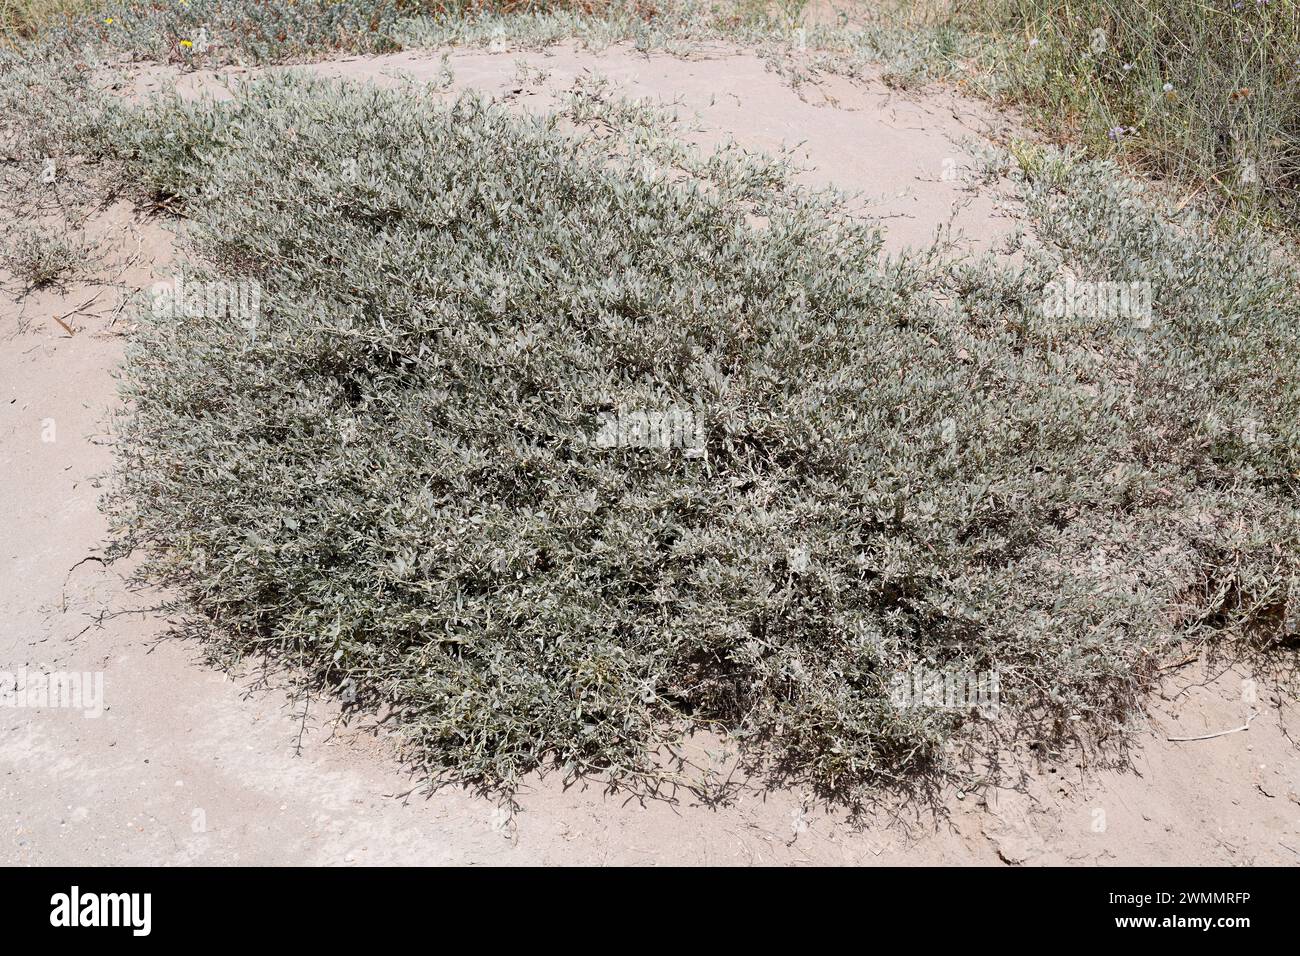 Sea purslane (Halimione portulacoides or Atriplex portulacoides) is an evergreen shrub native to salt-marshes of Europe, north Africa and Asia. Its le Stock Photo